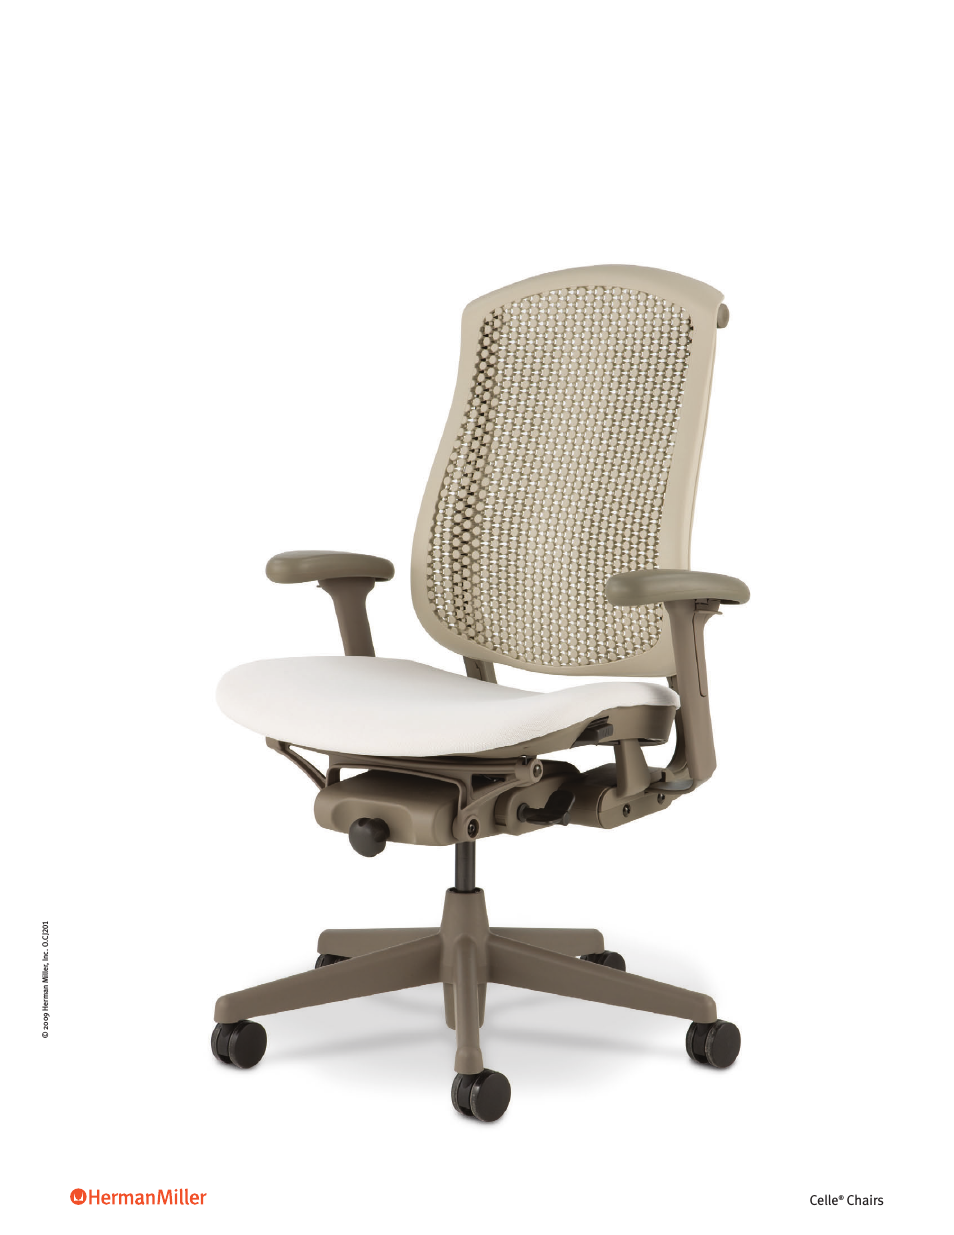 Celle Chairs - Brochure